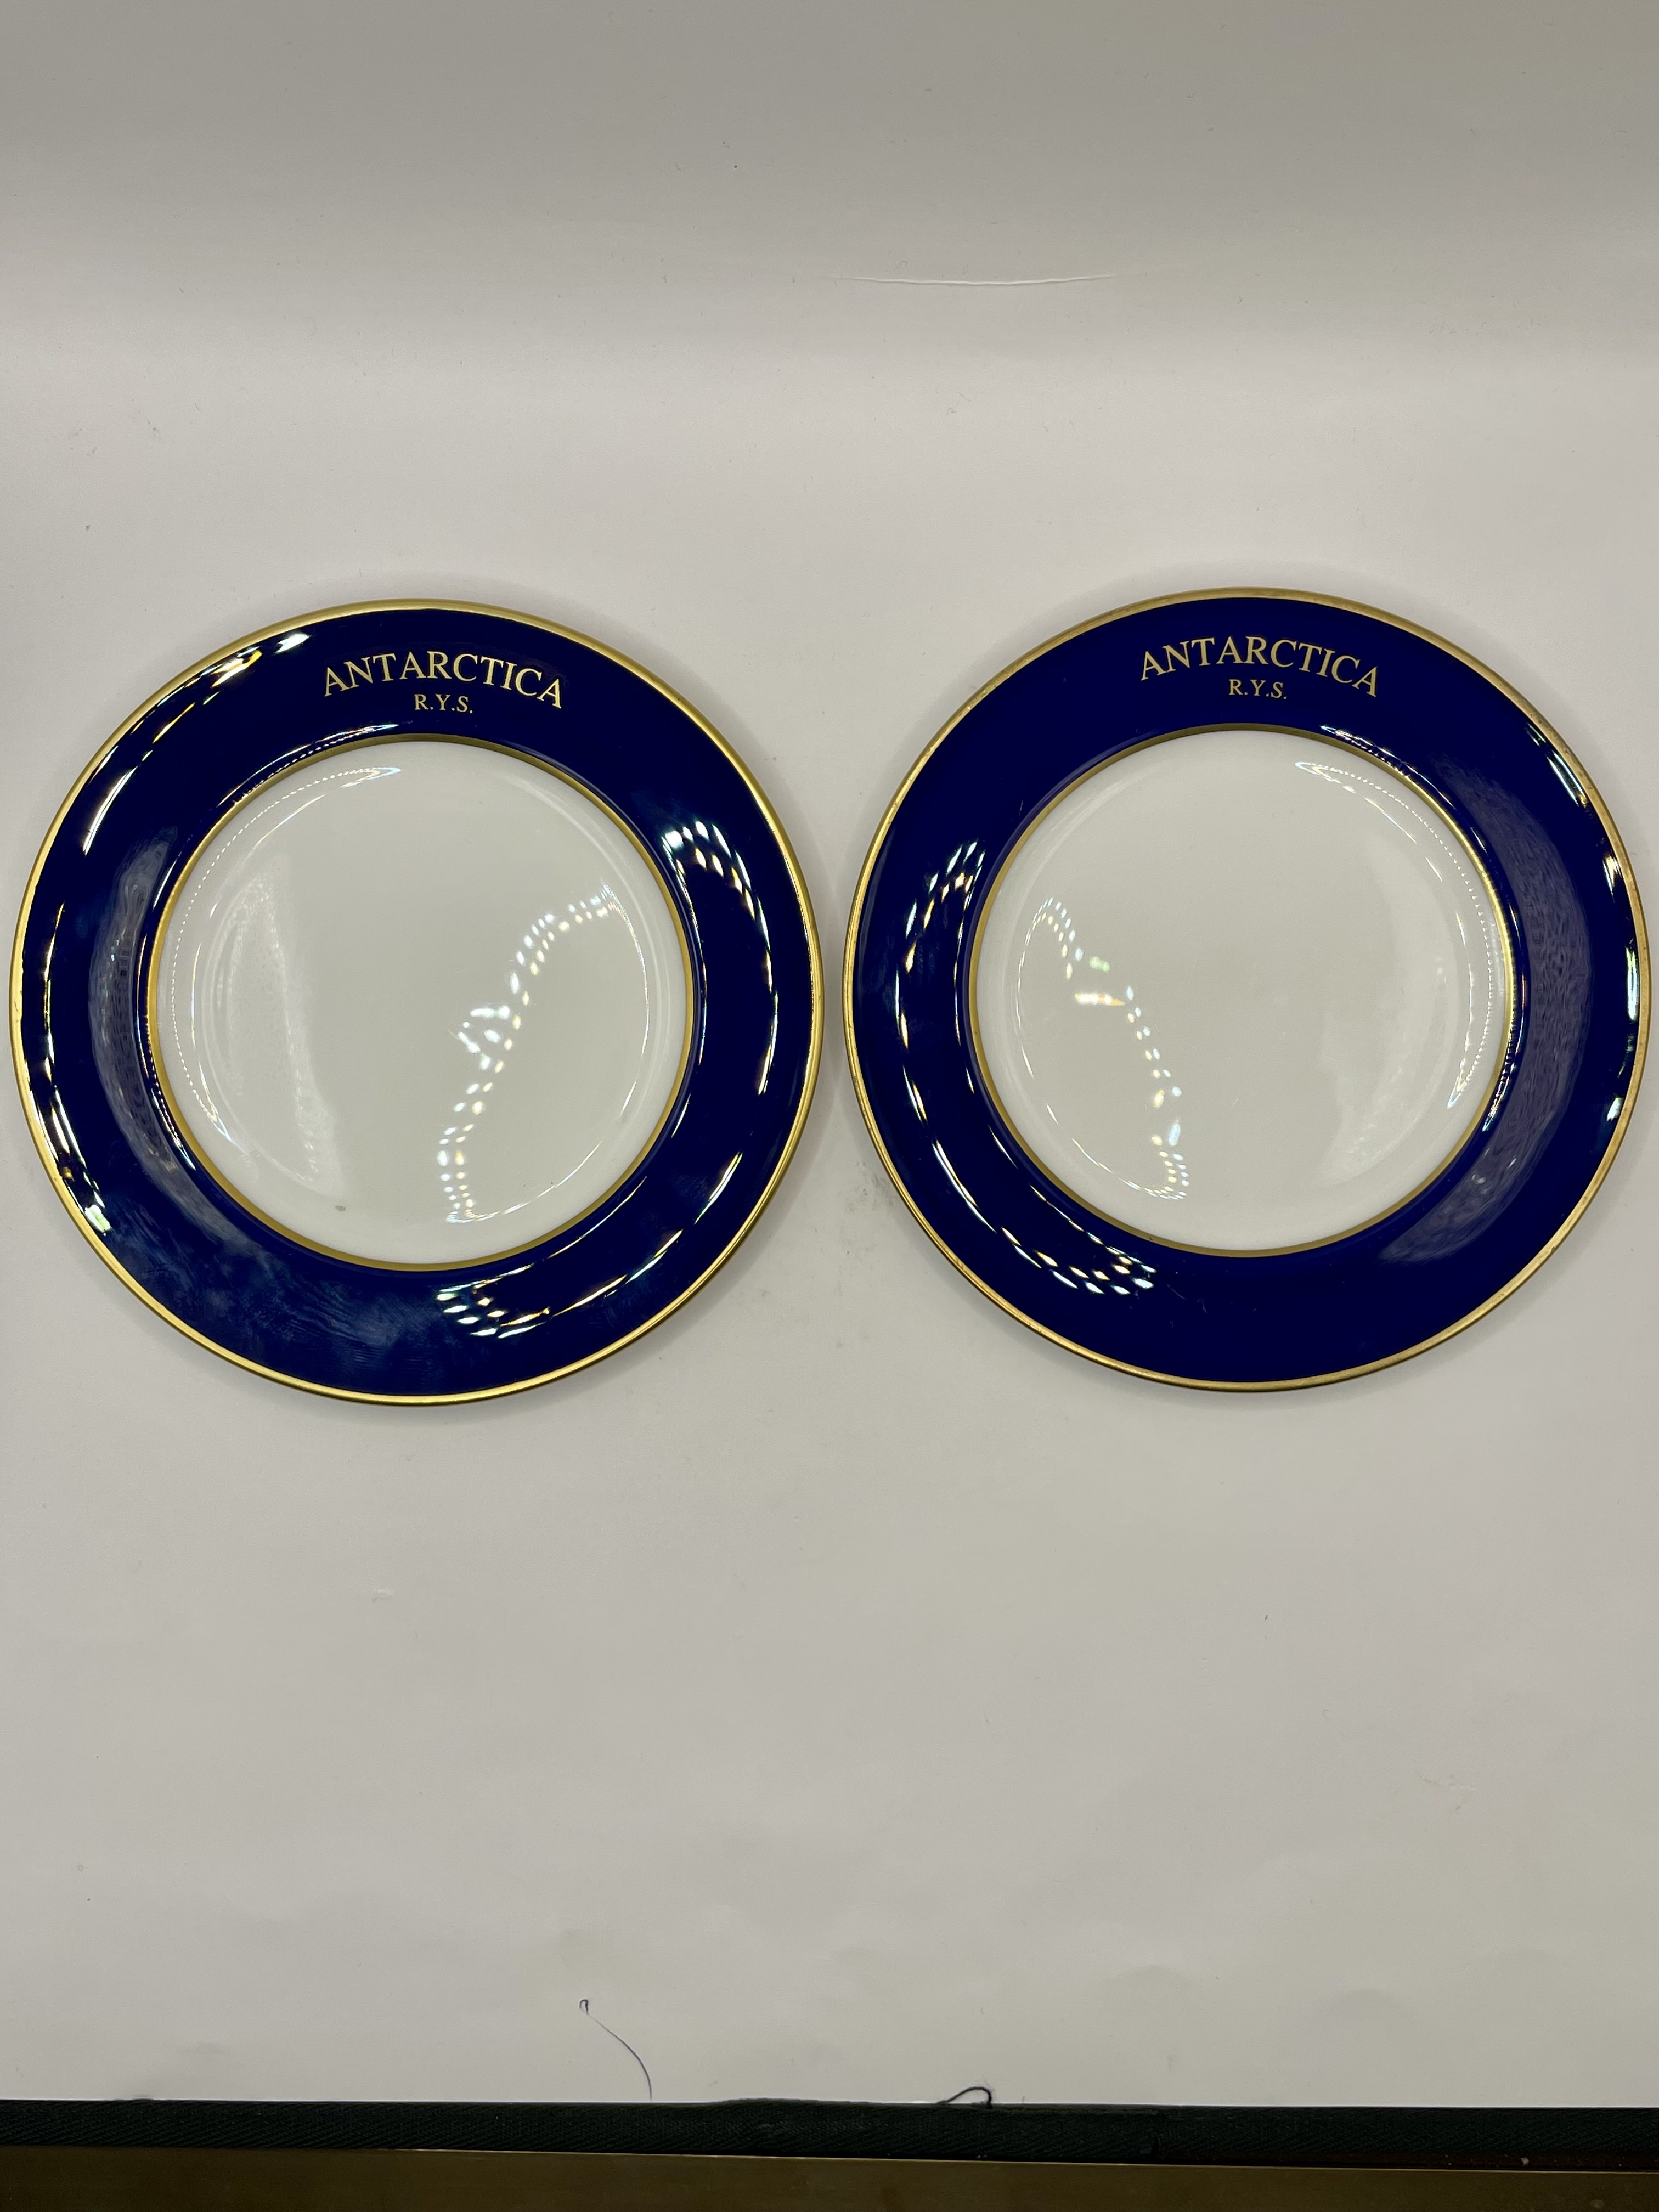 Thomas Goode Minton Antarctica R.Y.S mission side plates Extremely rare. 